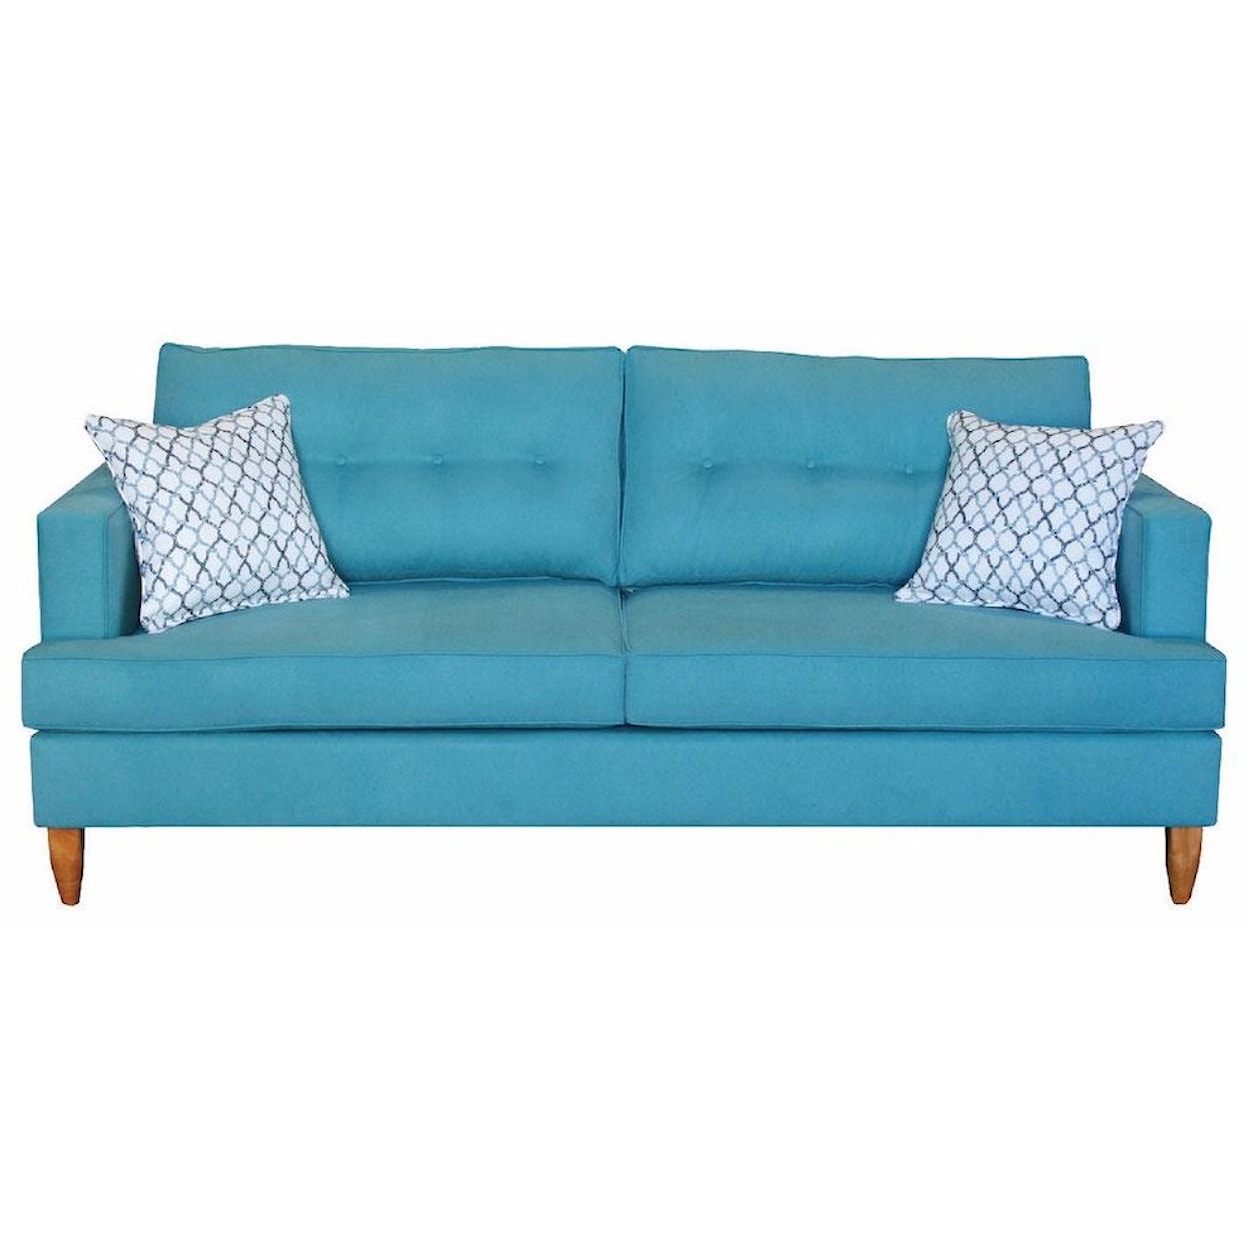 Sussex Upholstery Co. Lane 2 Cushion Sofa